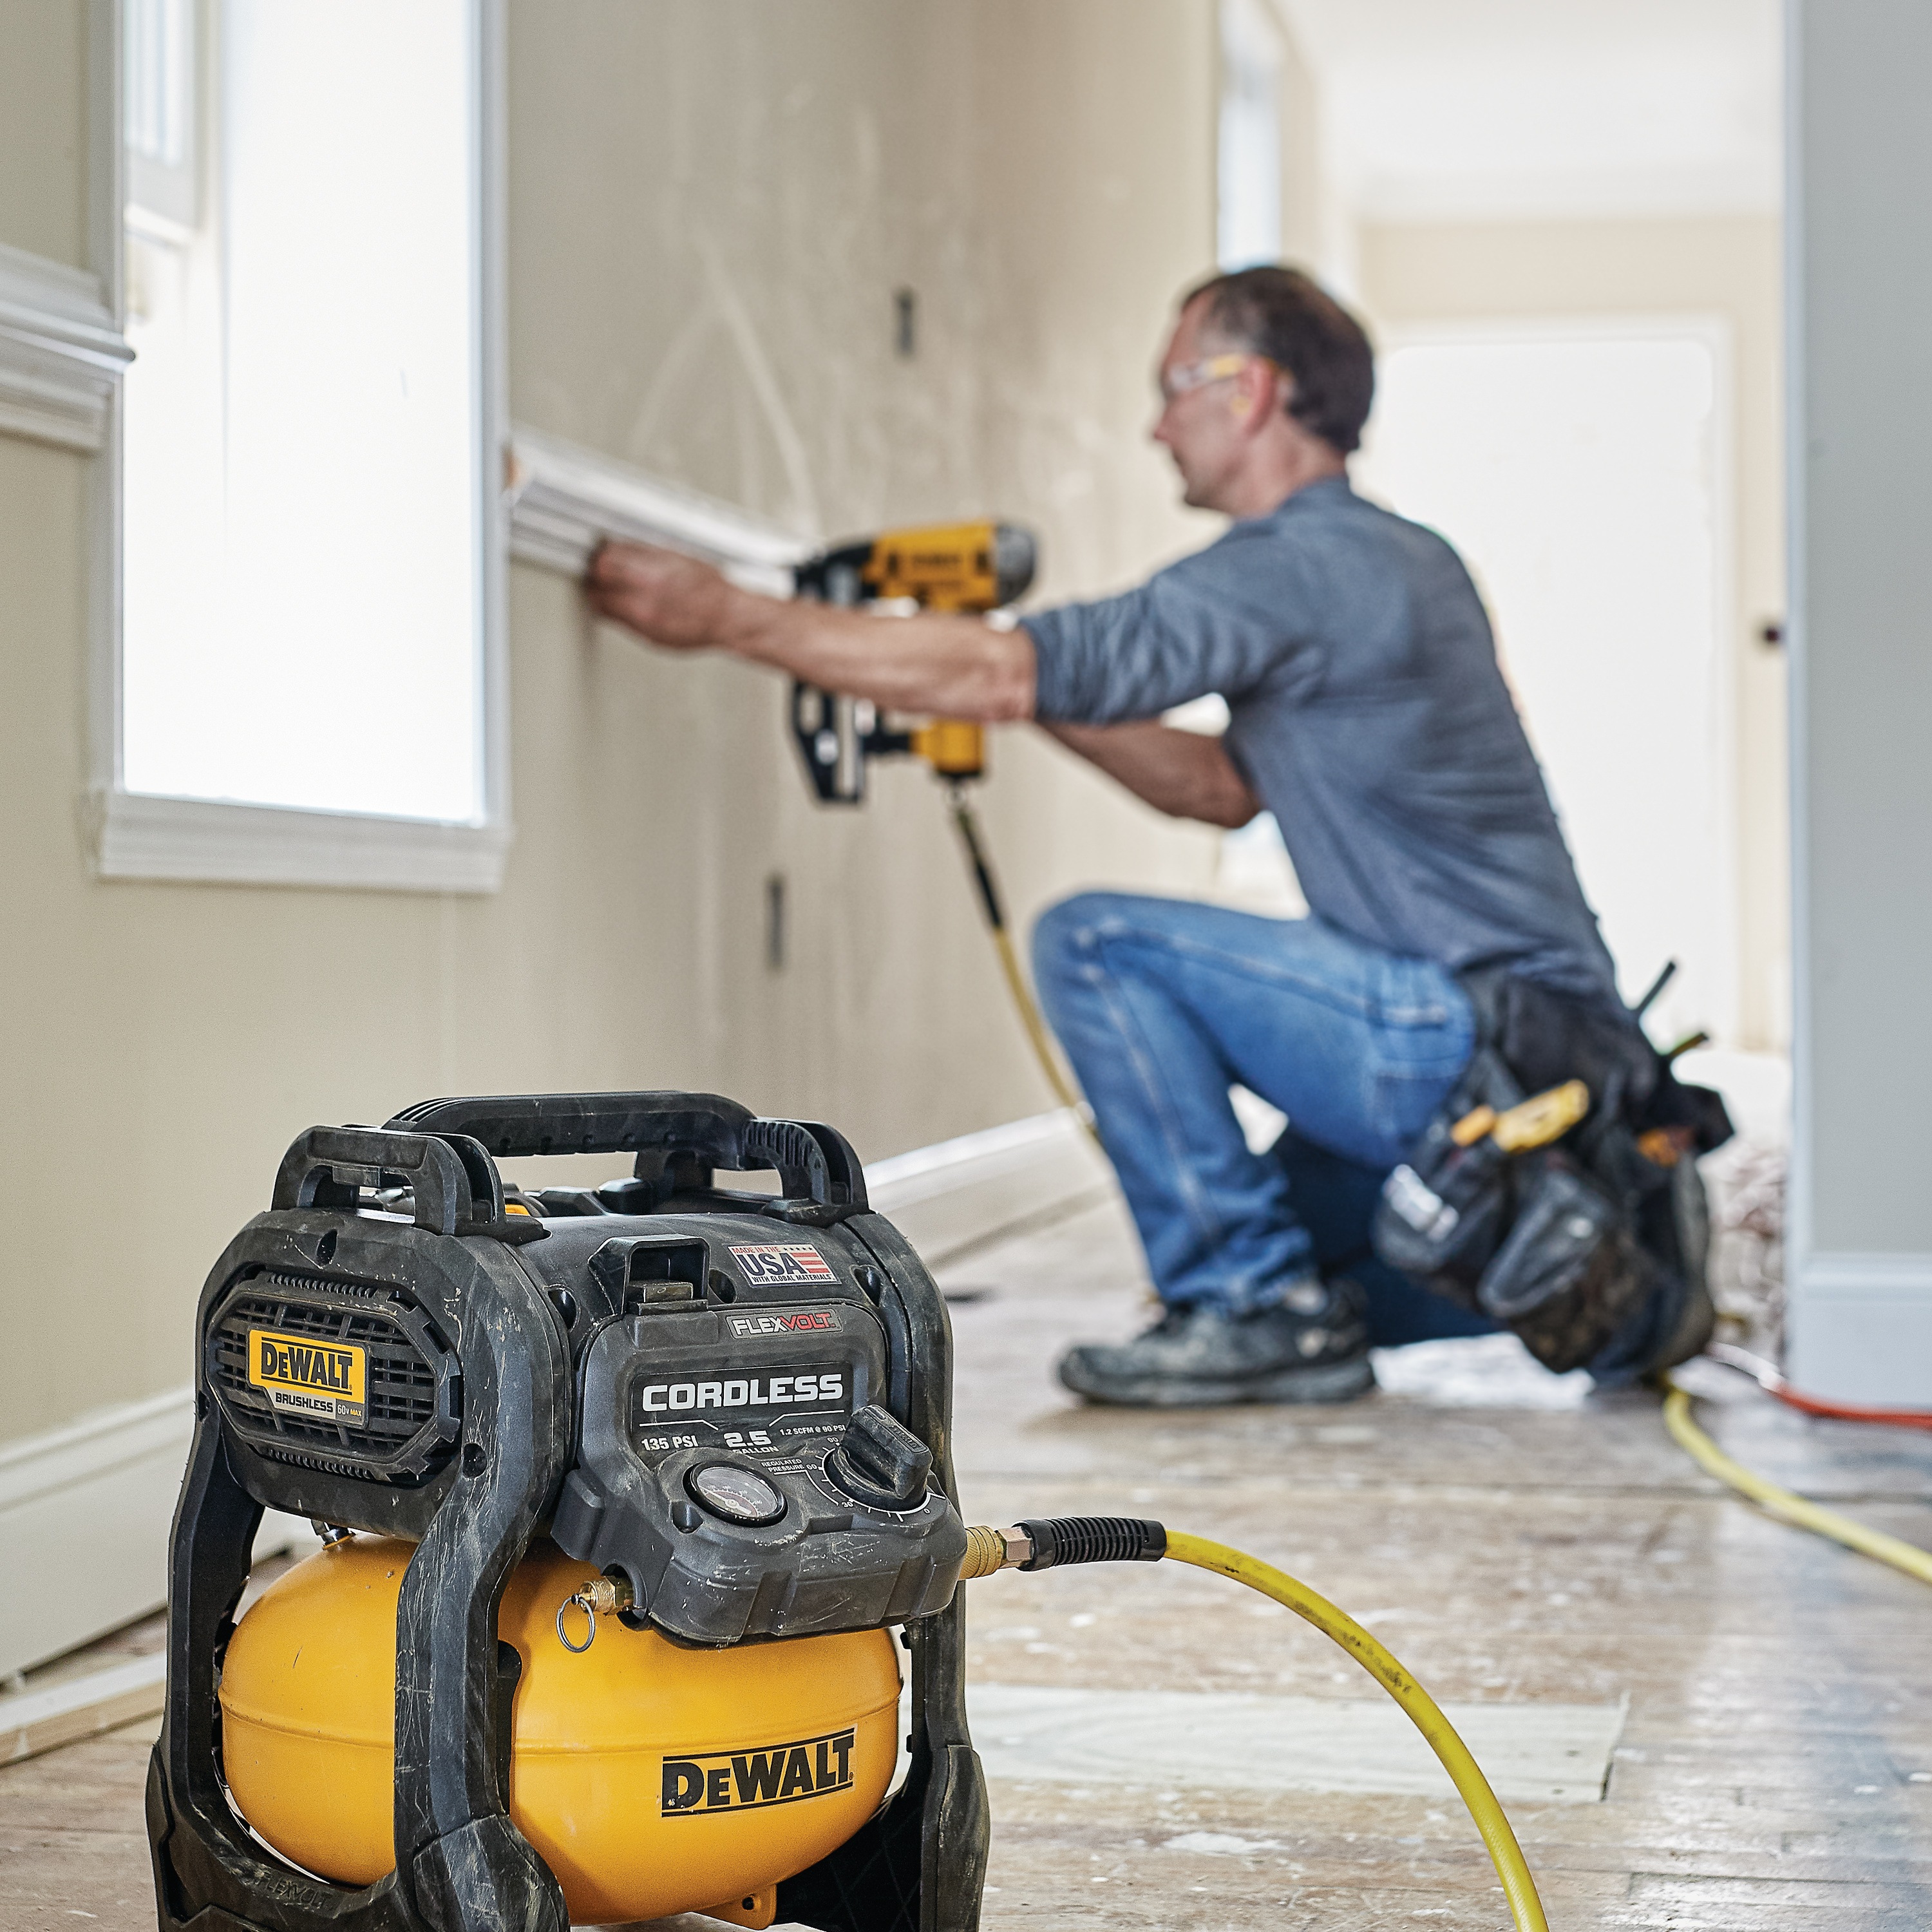 FLEXVOLT® 2.5 GALLON CORDLESS AIR COMPRESSOR being used by a person to power a pneumatic nailer